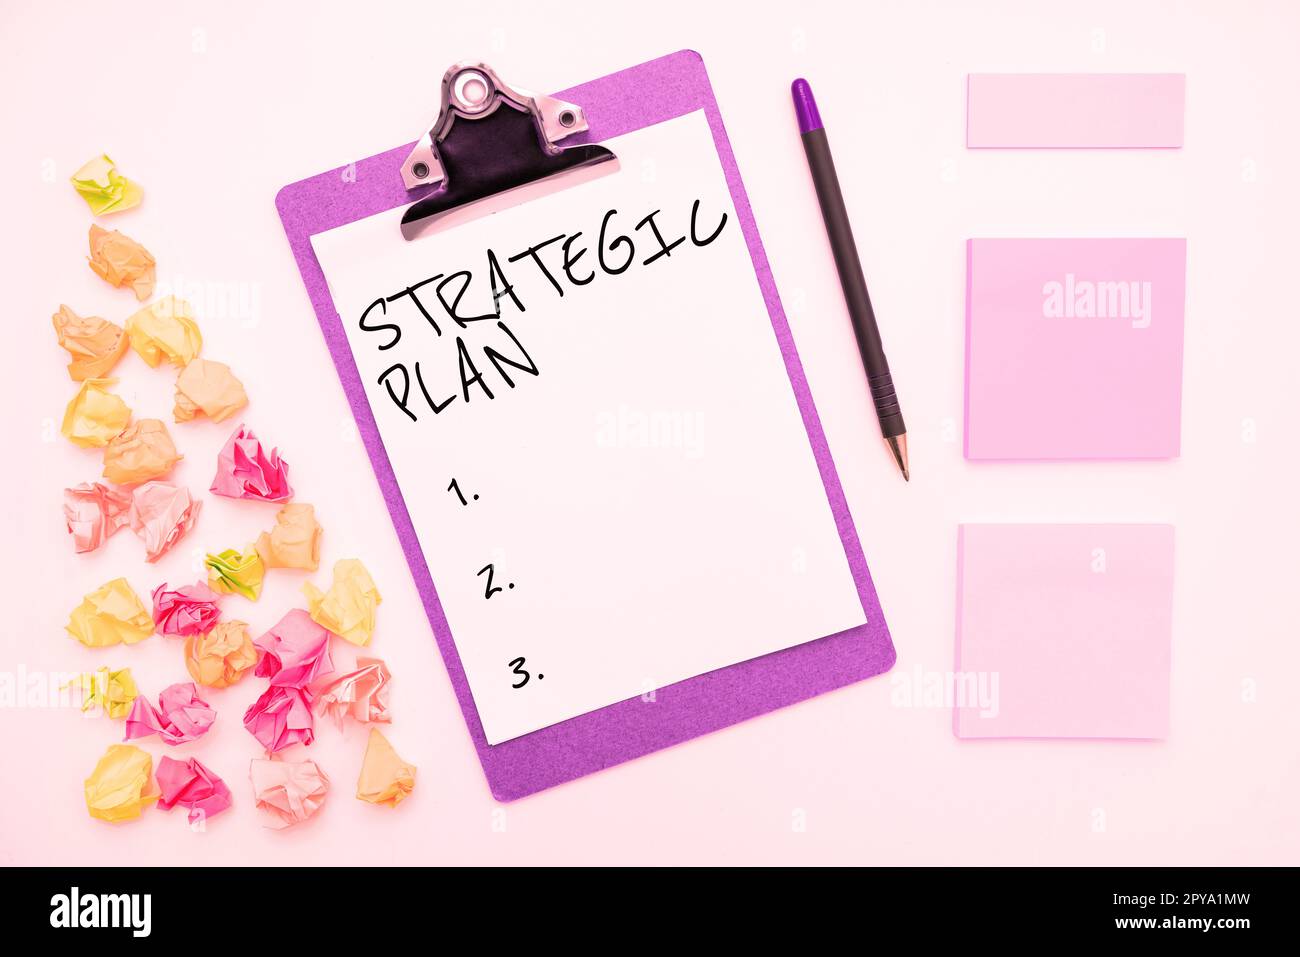 Hand writing sign Strategic Plan. Concept meaning A process of defining strategy and making decisions Stock Photo